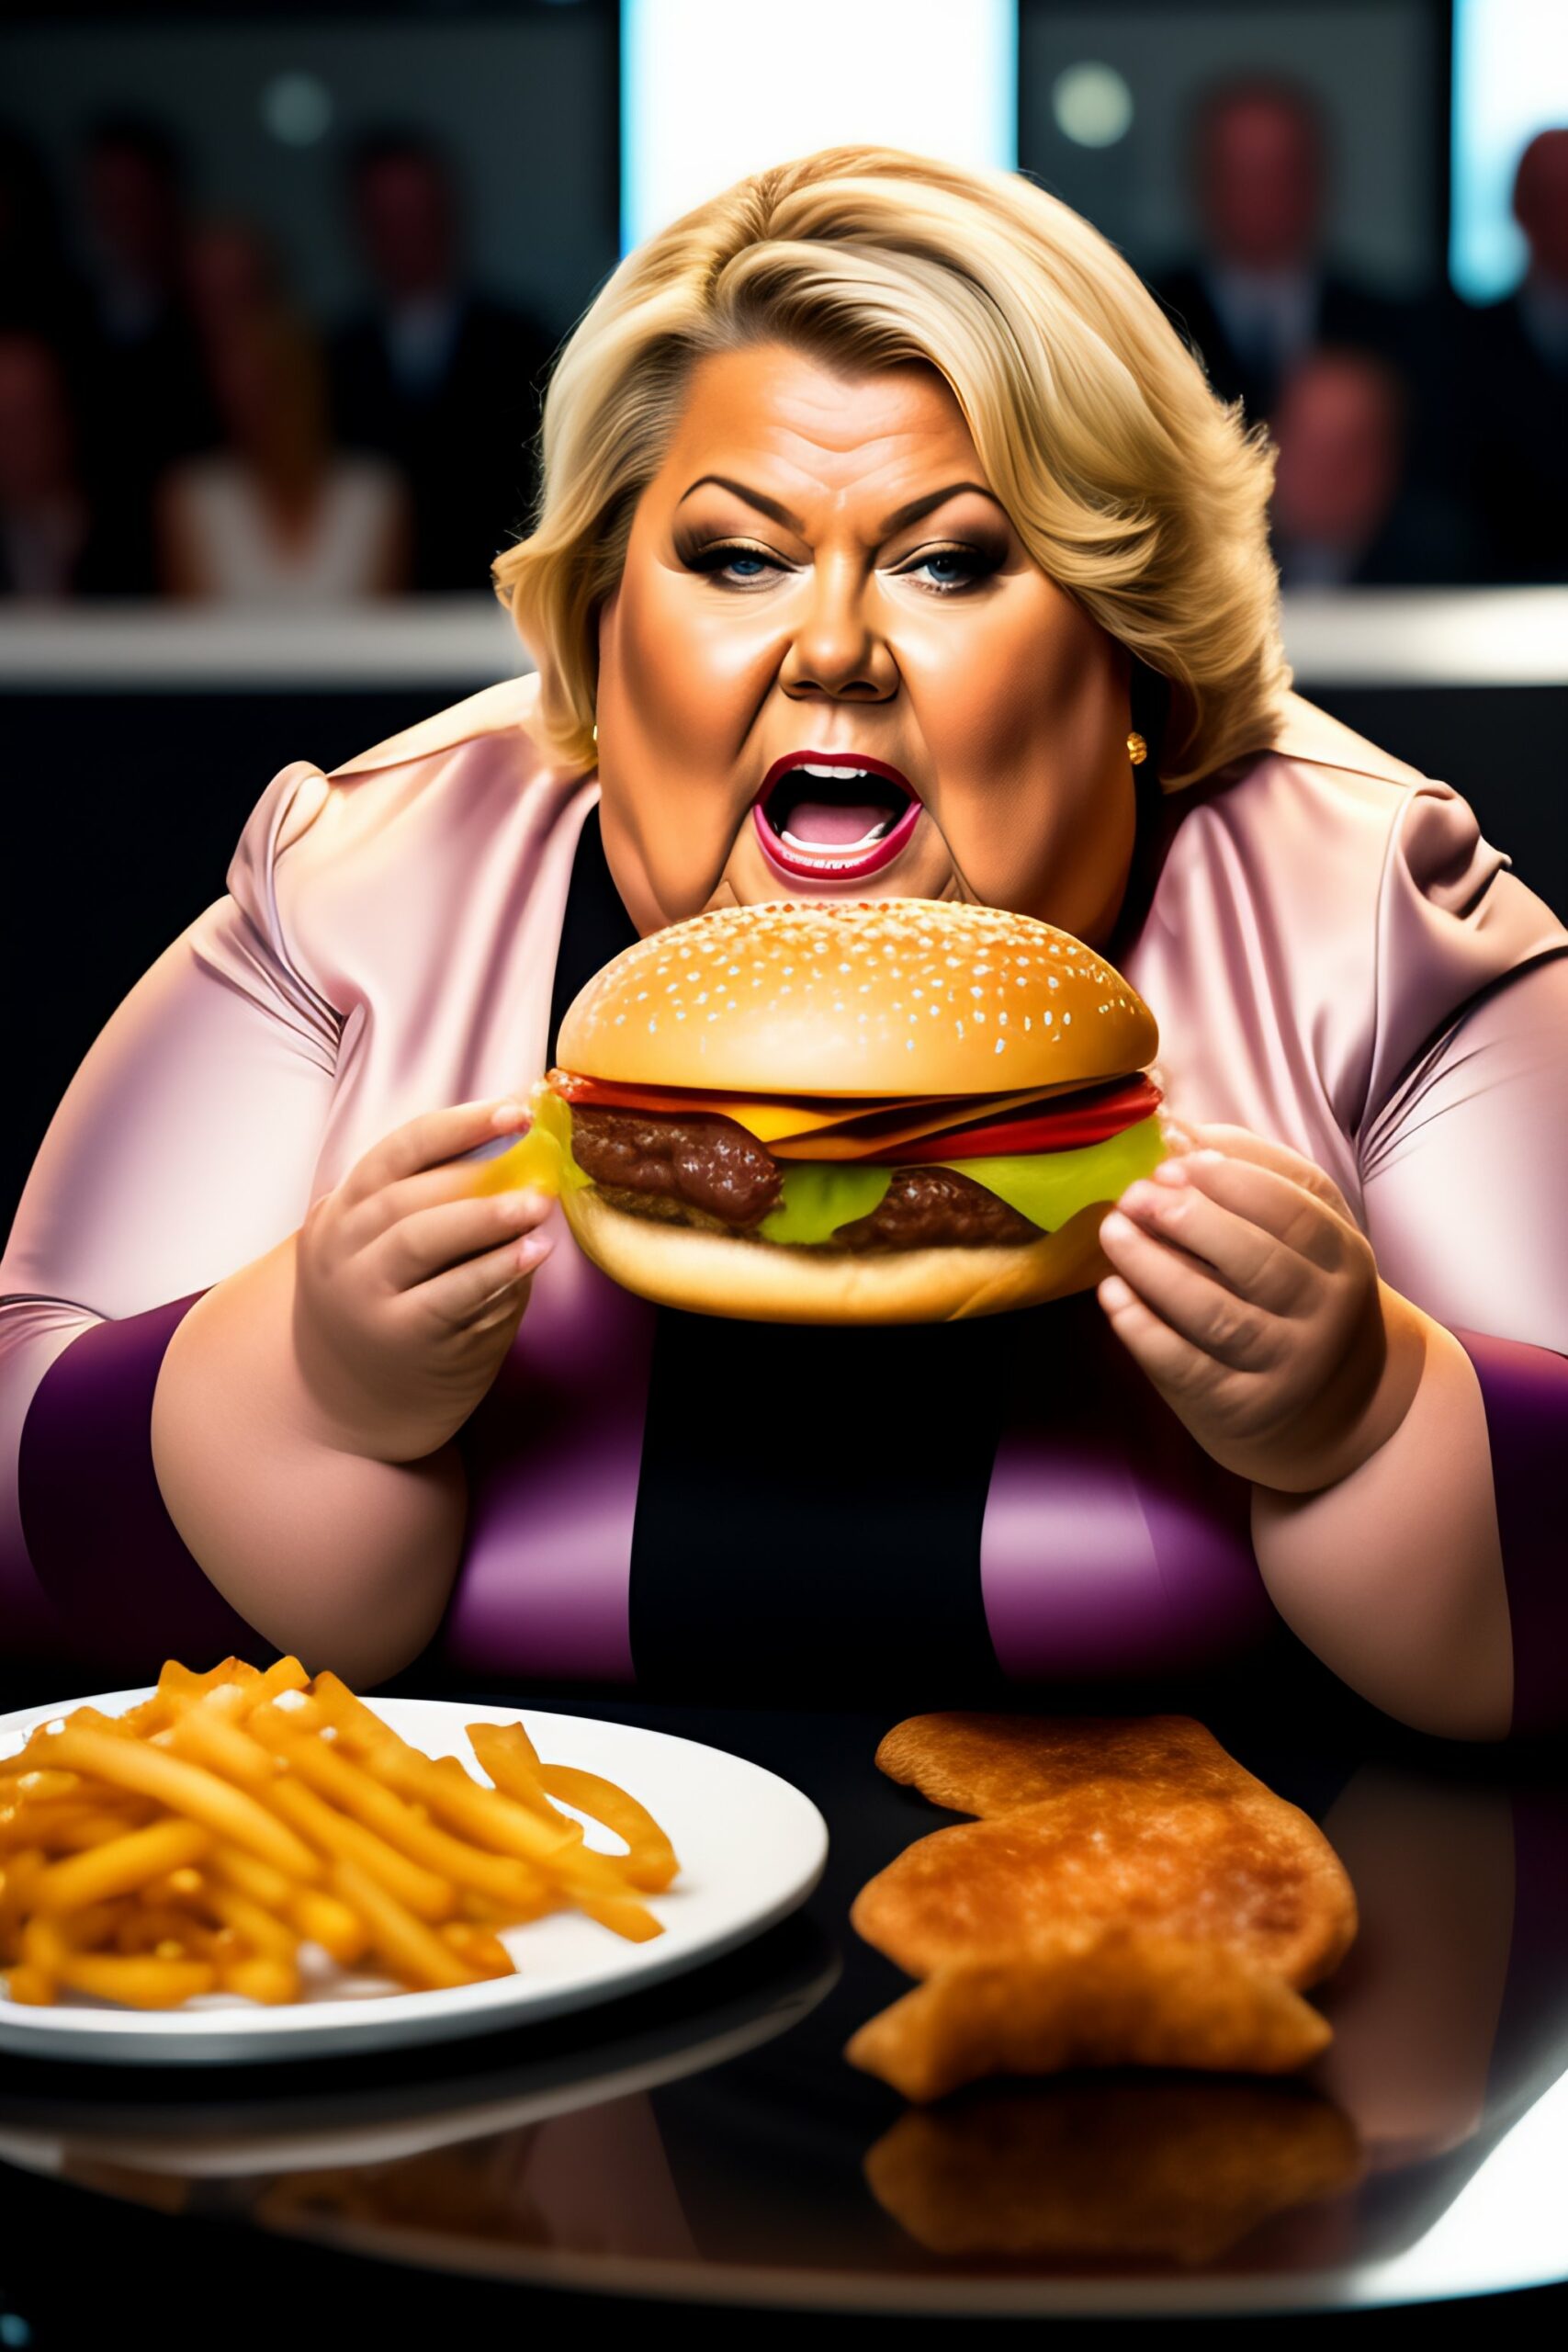 Health Balanced The Dangers of Eating Too Much Fast Food